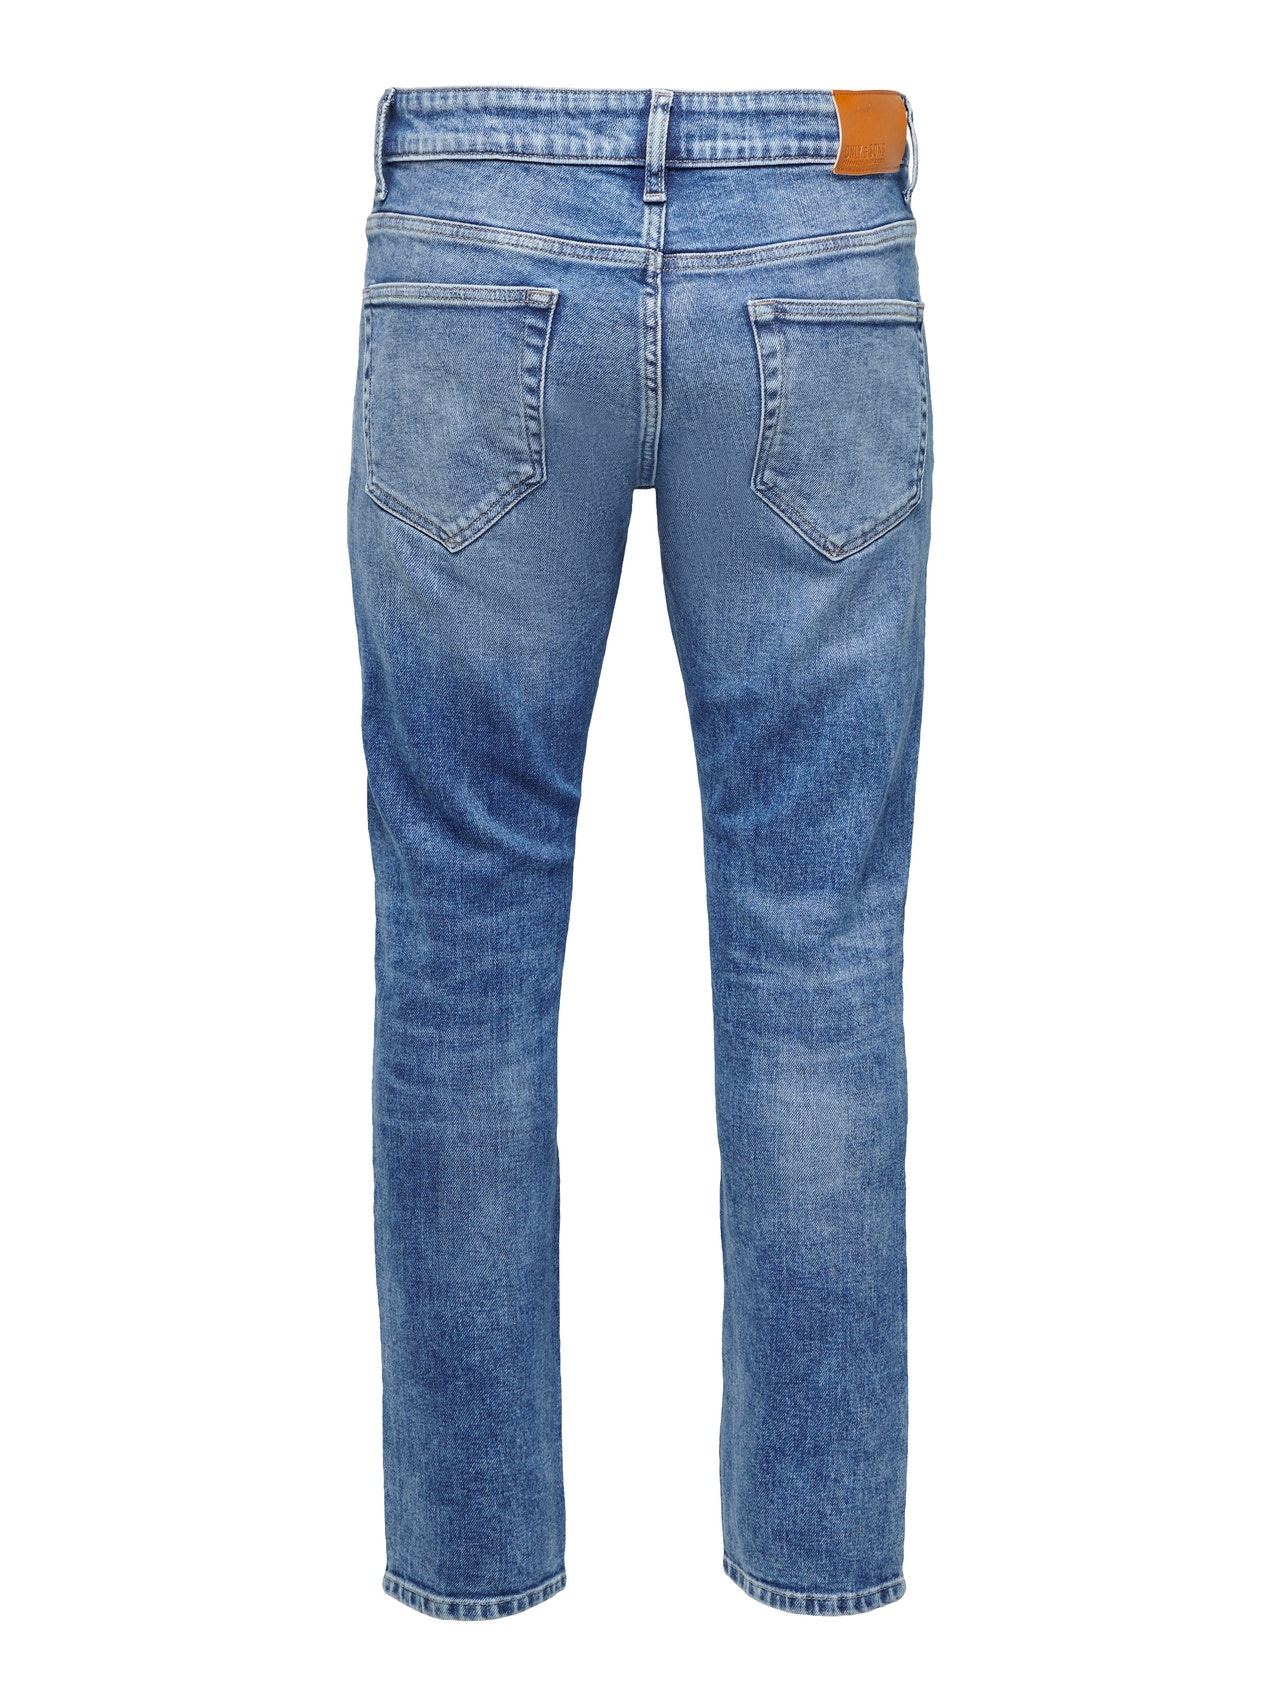 ONLY & SONS Jeans Slim Fit Taille moyenne -Medium Blue Denim - 22025094